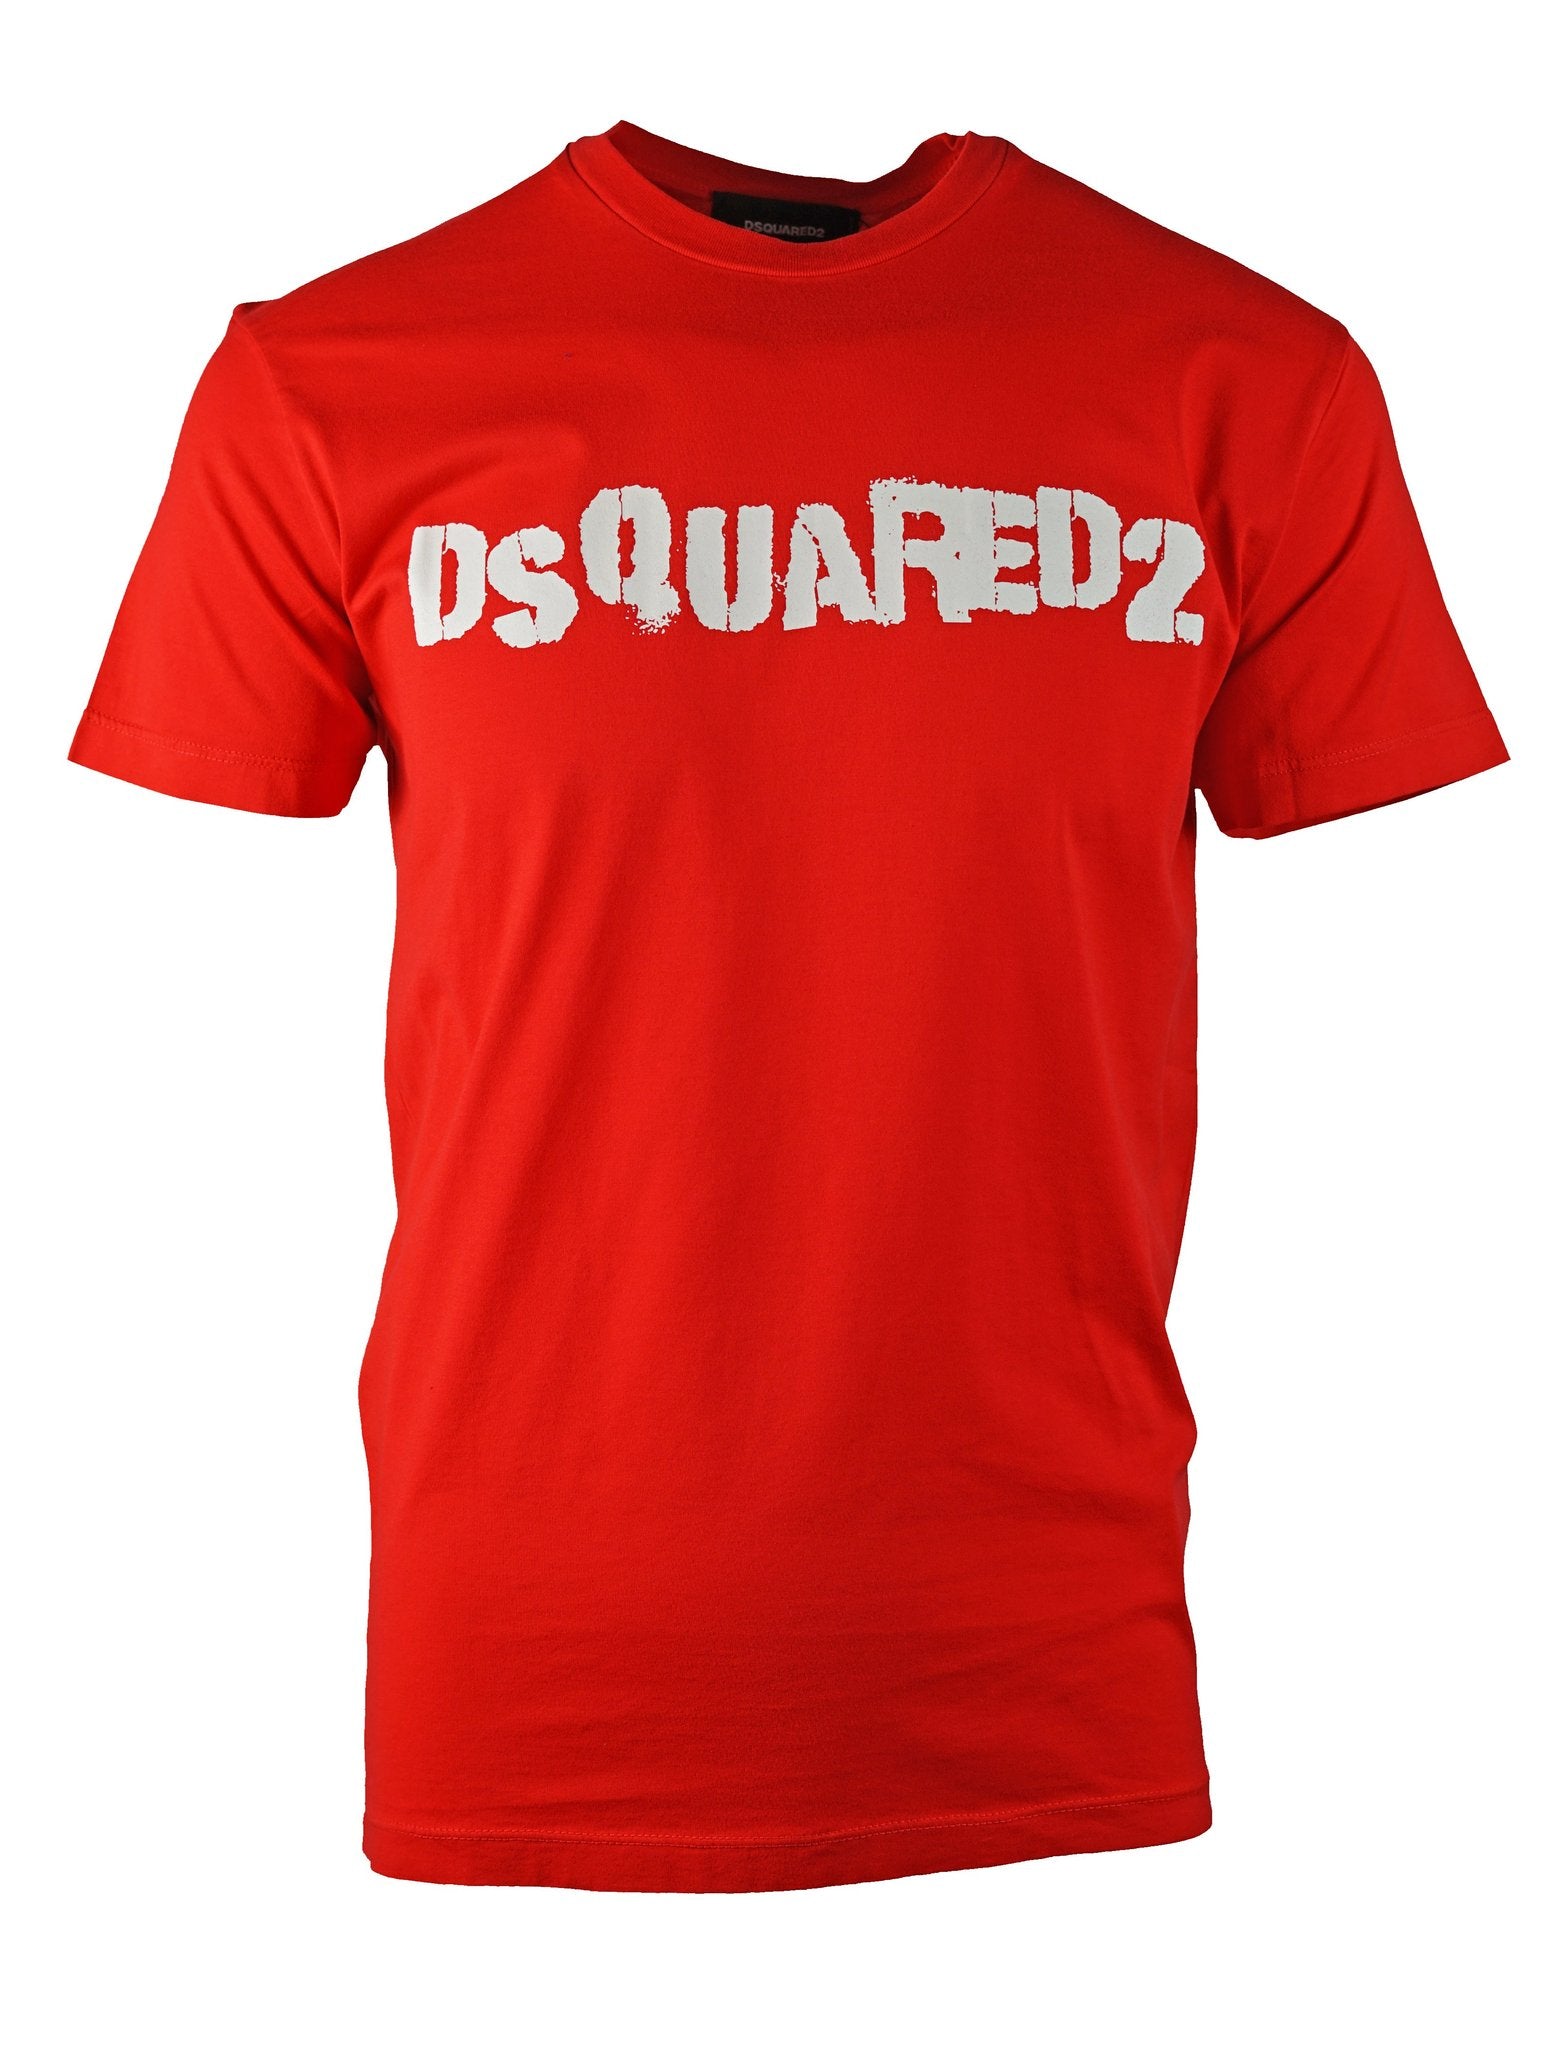 DSquared2 Cracked T-Shirt Red